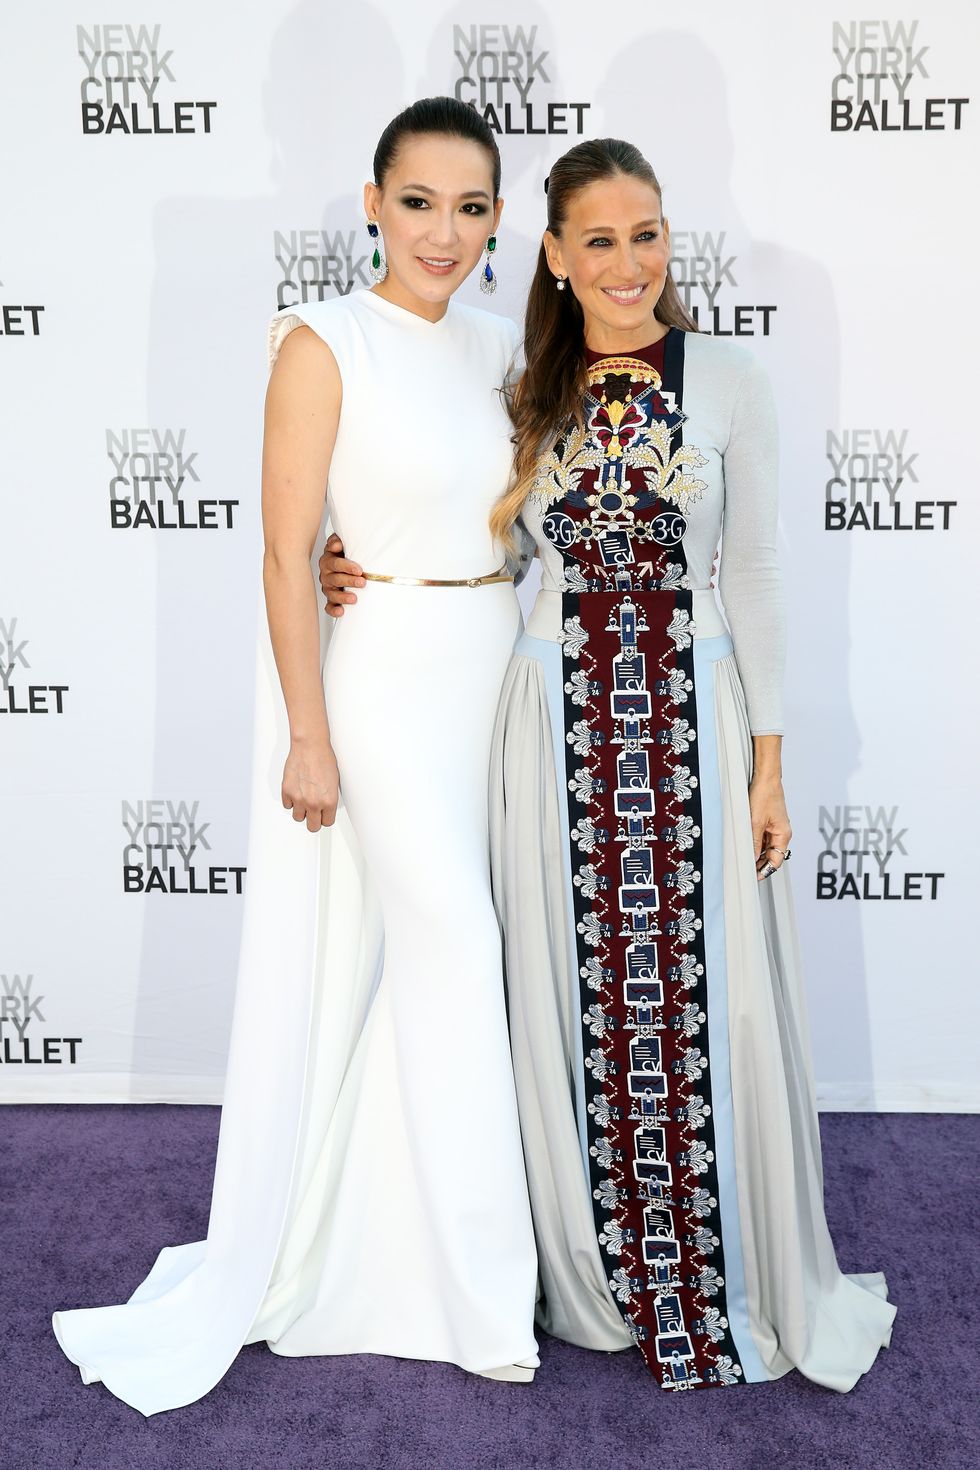 Cindy Chao poses with Sarah Jessica Parker at the New York City Ballet Fall Gala